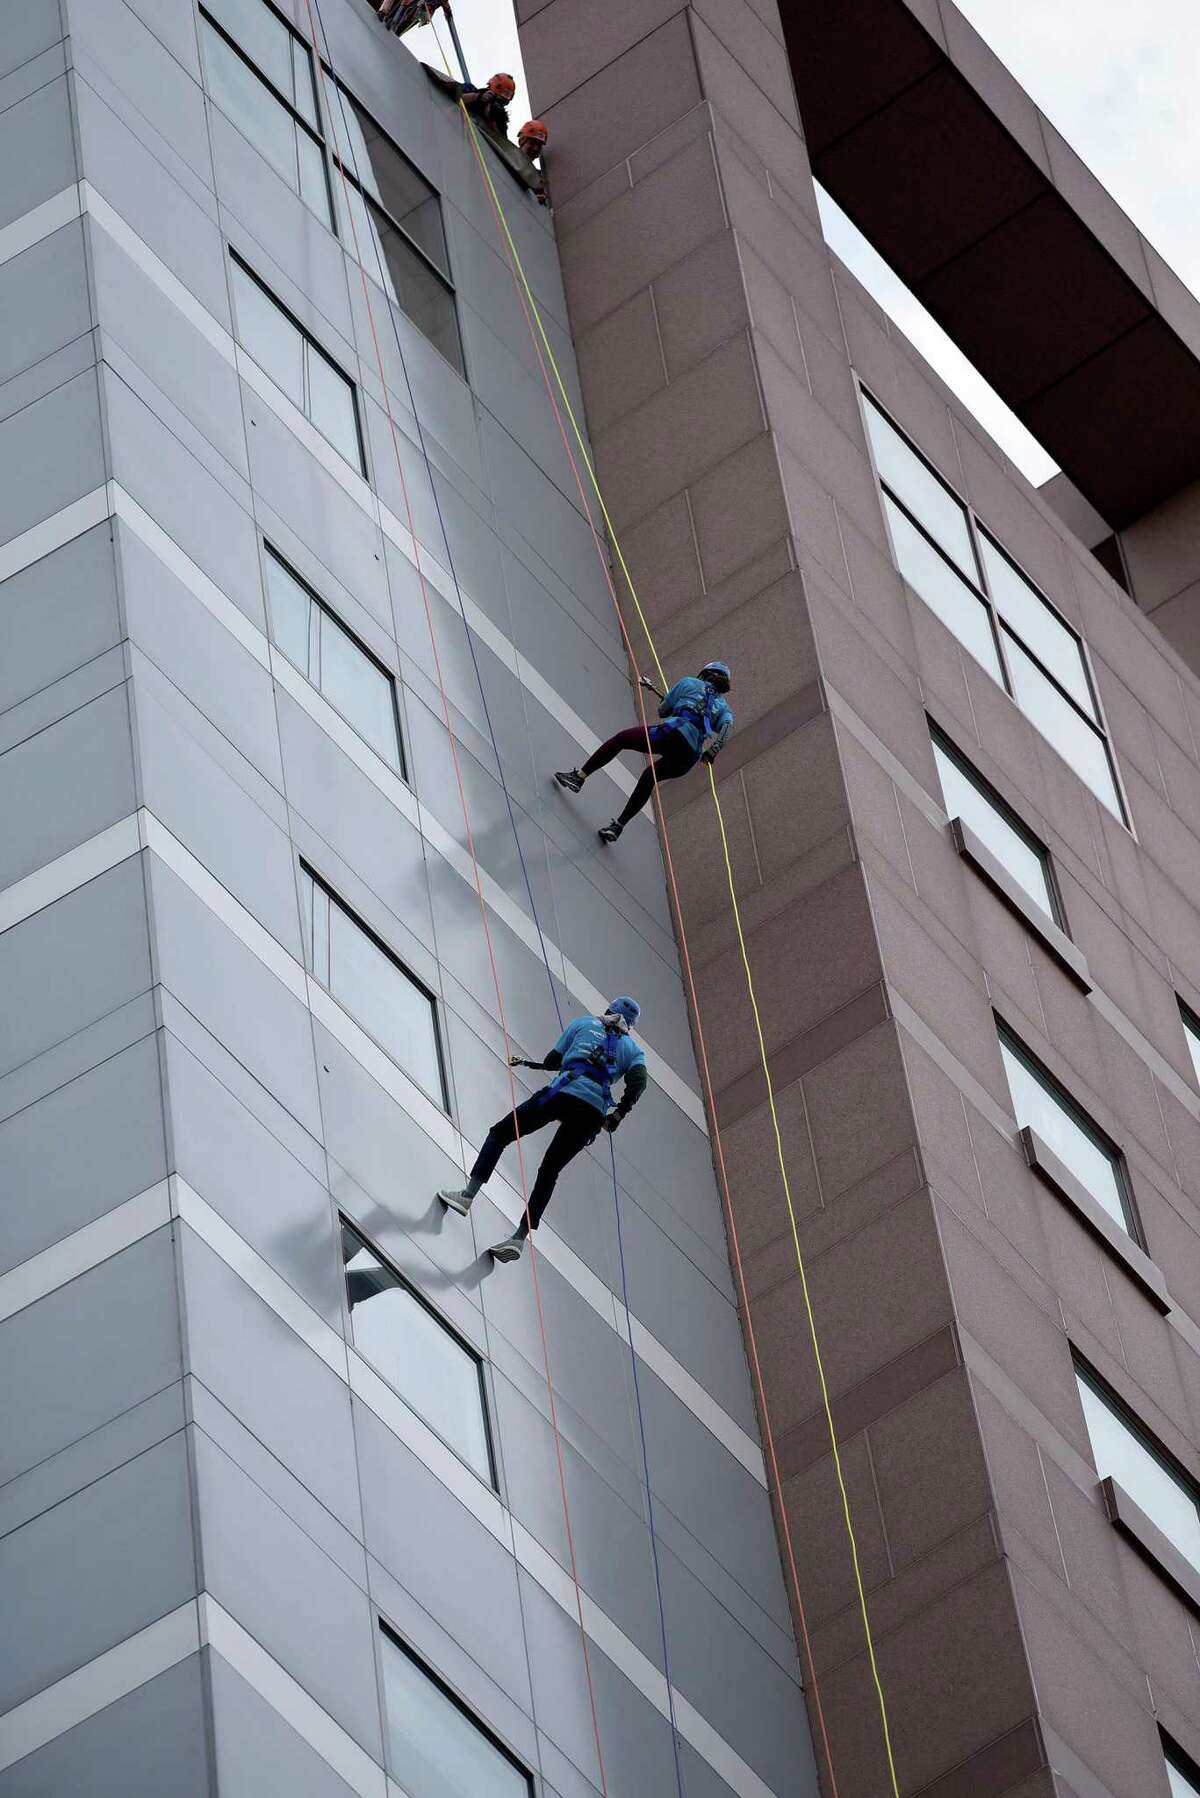 Two friends, John Guzzi, left, and Nadeen Hussain, both 28, from Milford, rappel from the top of the People’s United Bank building.